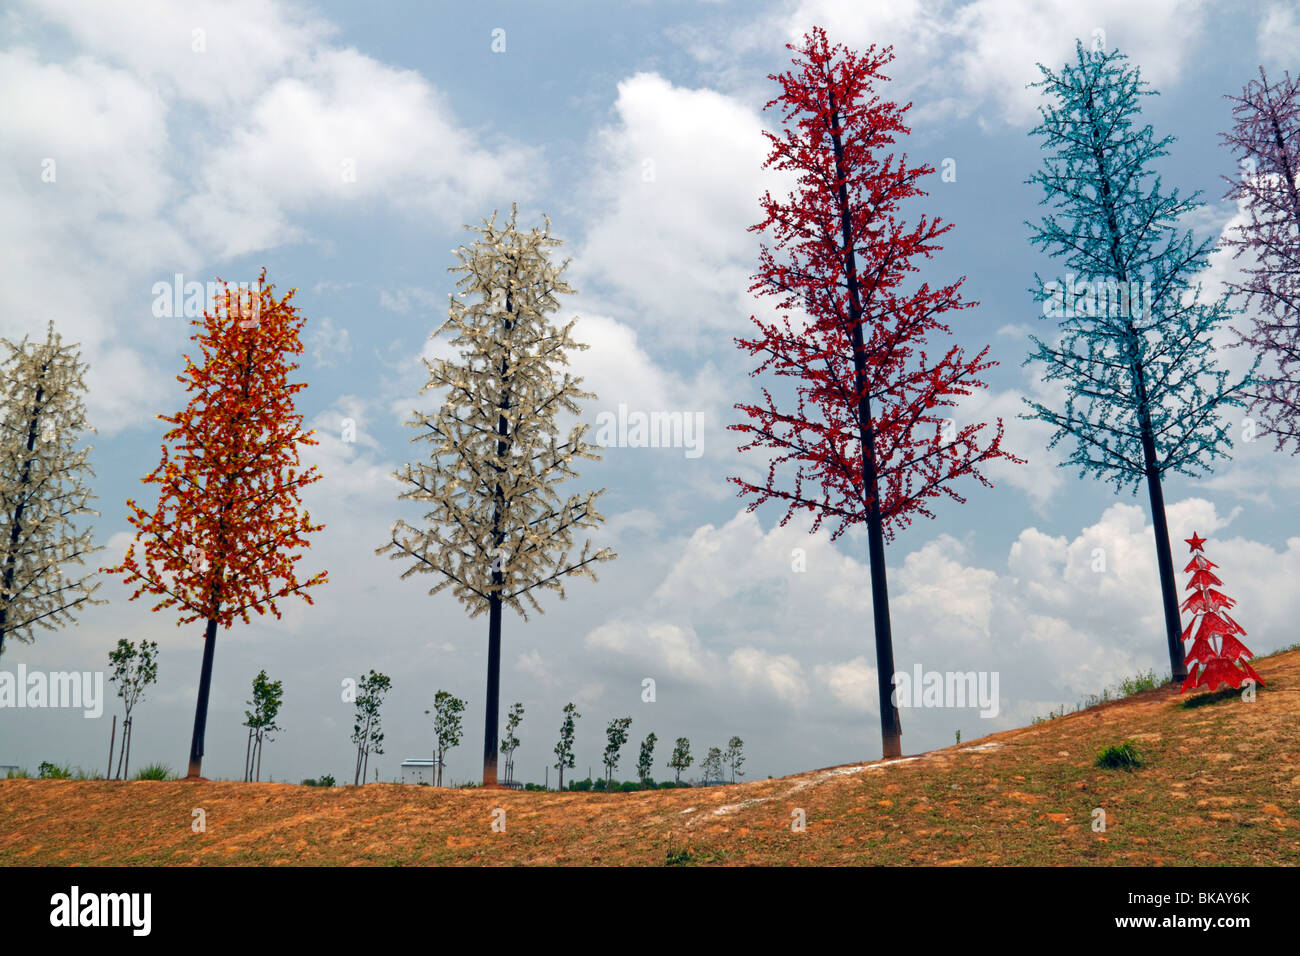 Fantasy land of artificial electric trees Stock Photo